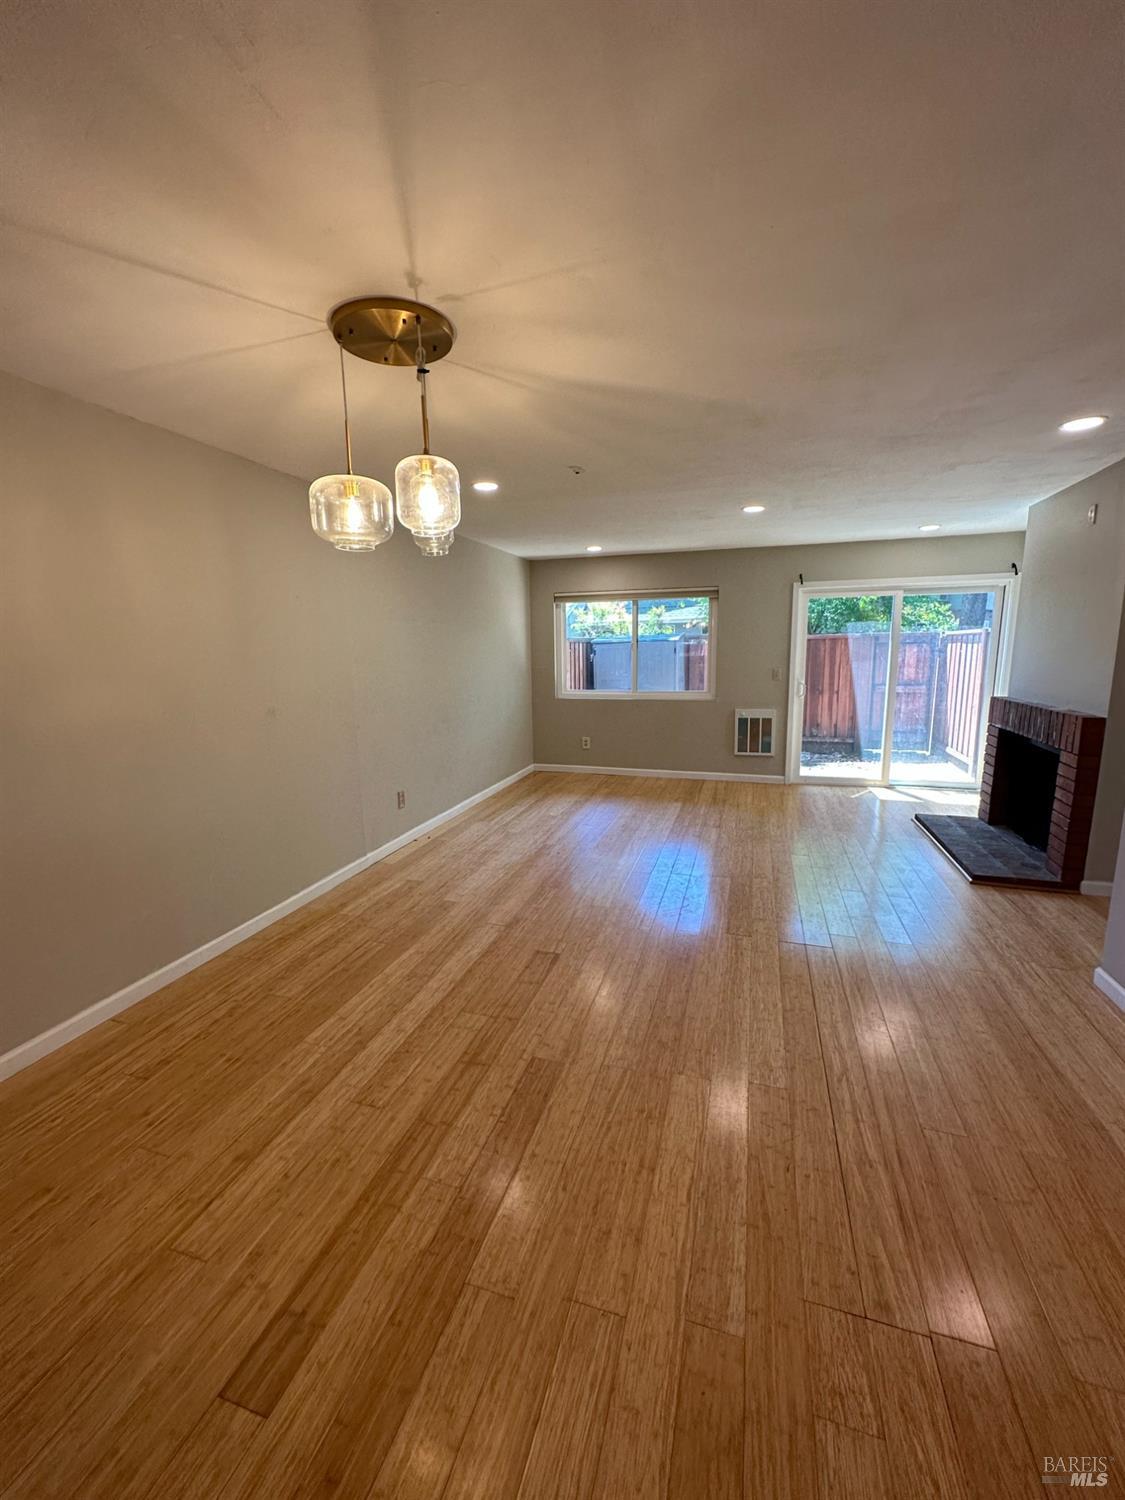 a view of wooden floor and a chandelier in a room